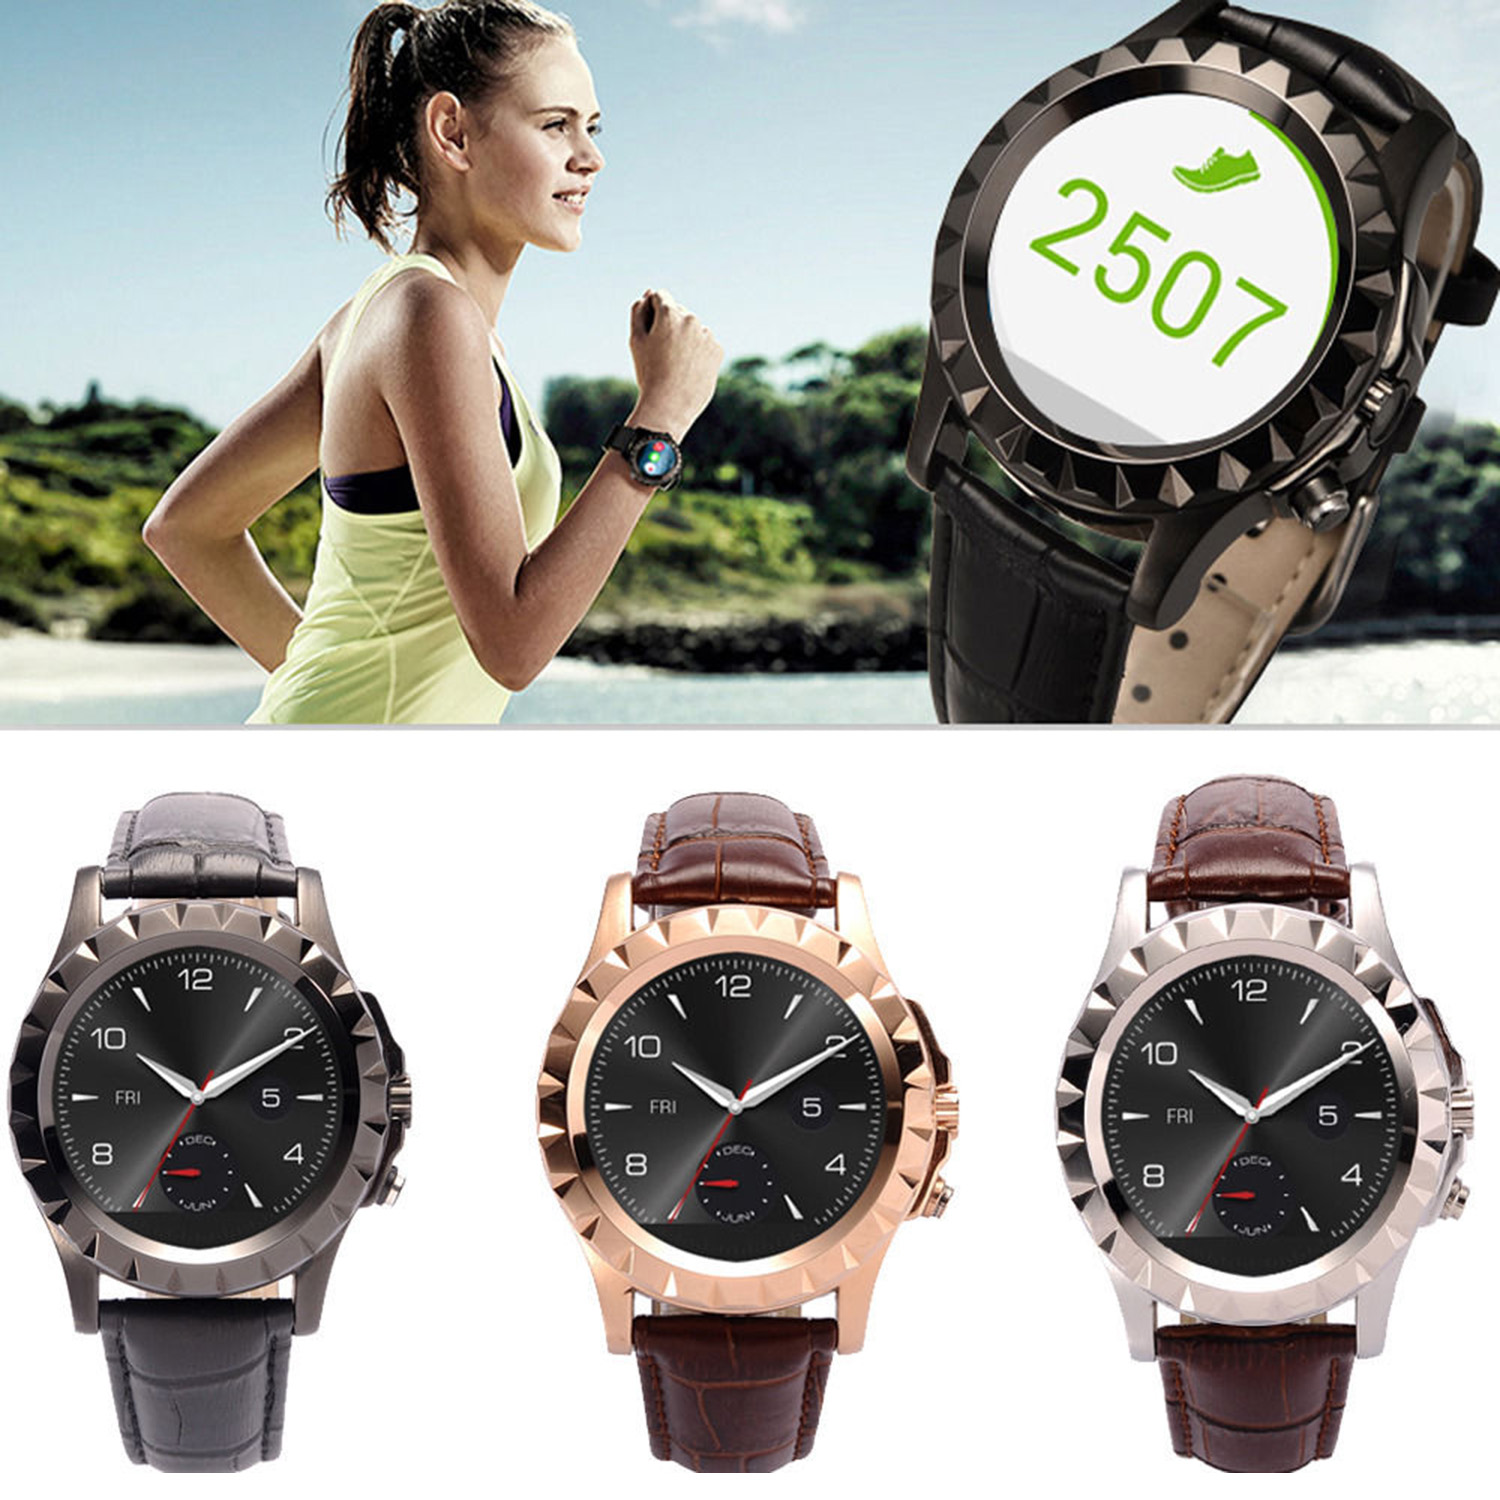 Bluetooth-     smartwatch  android-ios iphone 6 s6 s6  